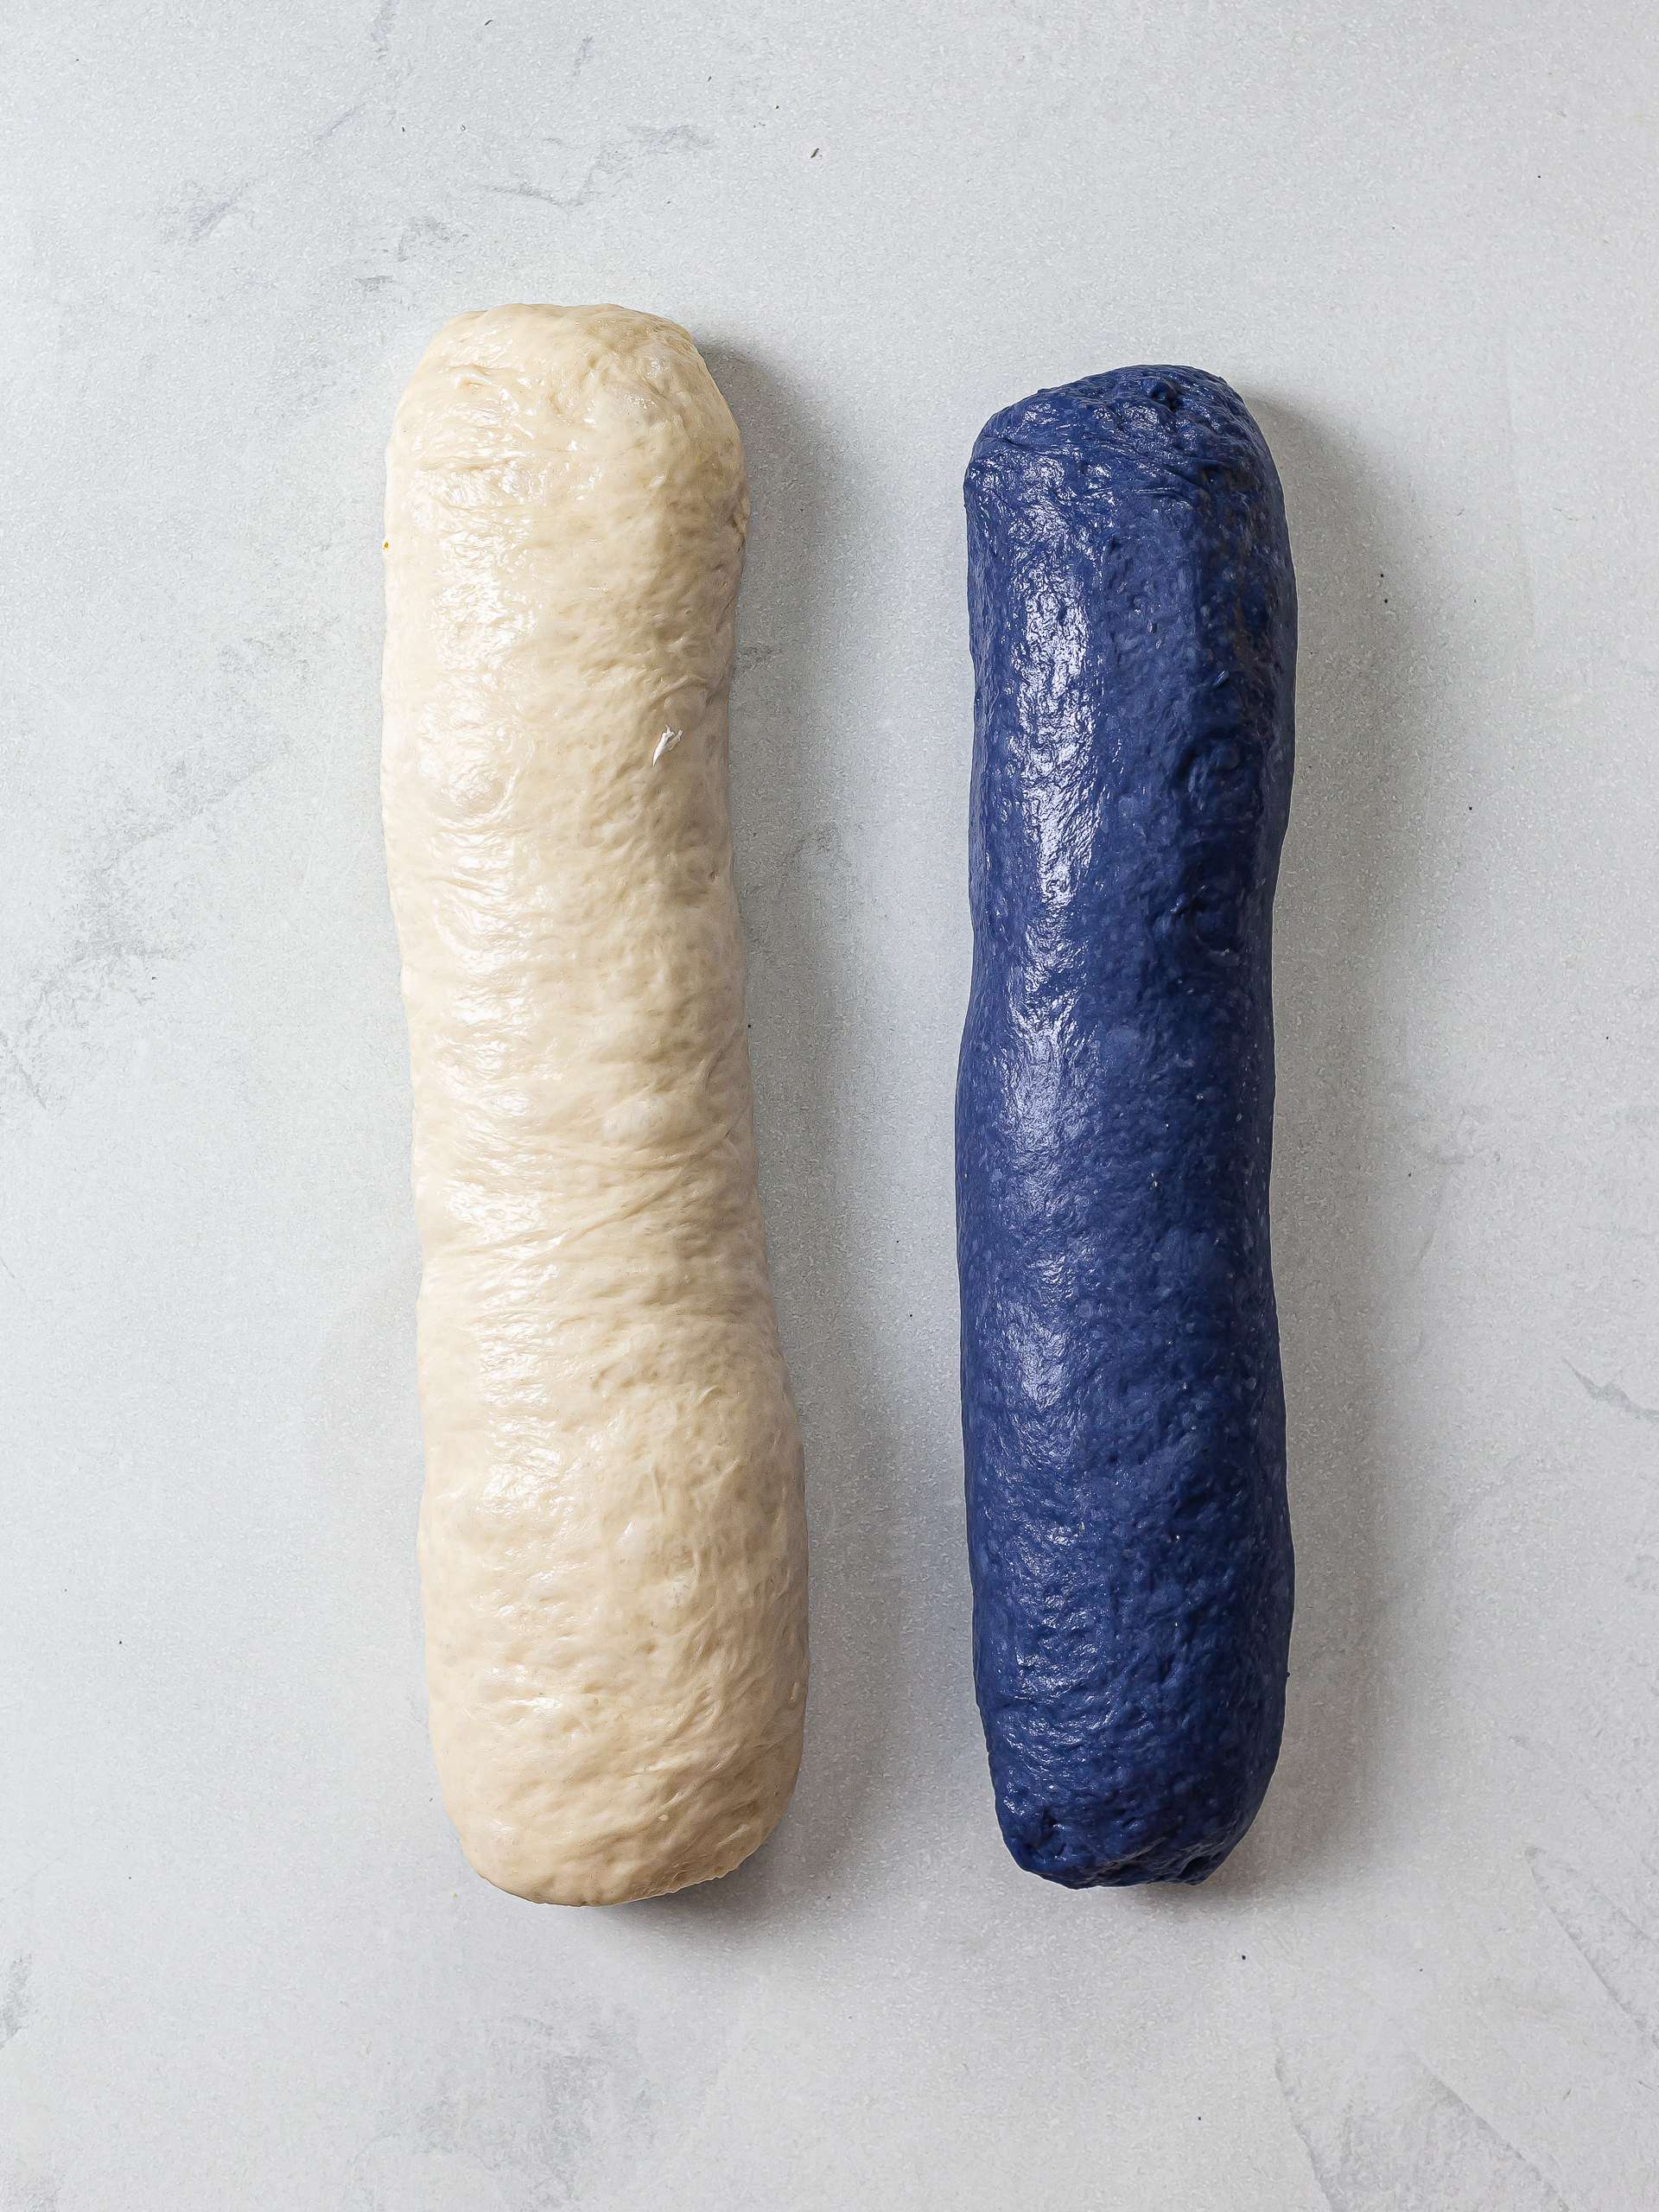 white and blue bread dough rolls to make braided bread